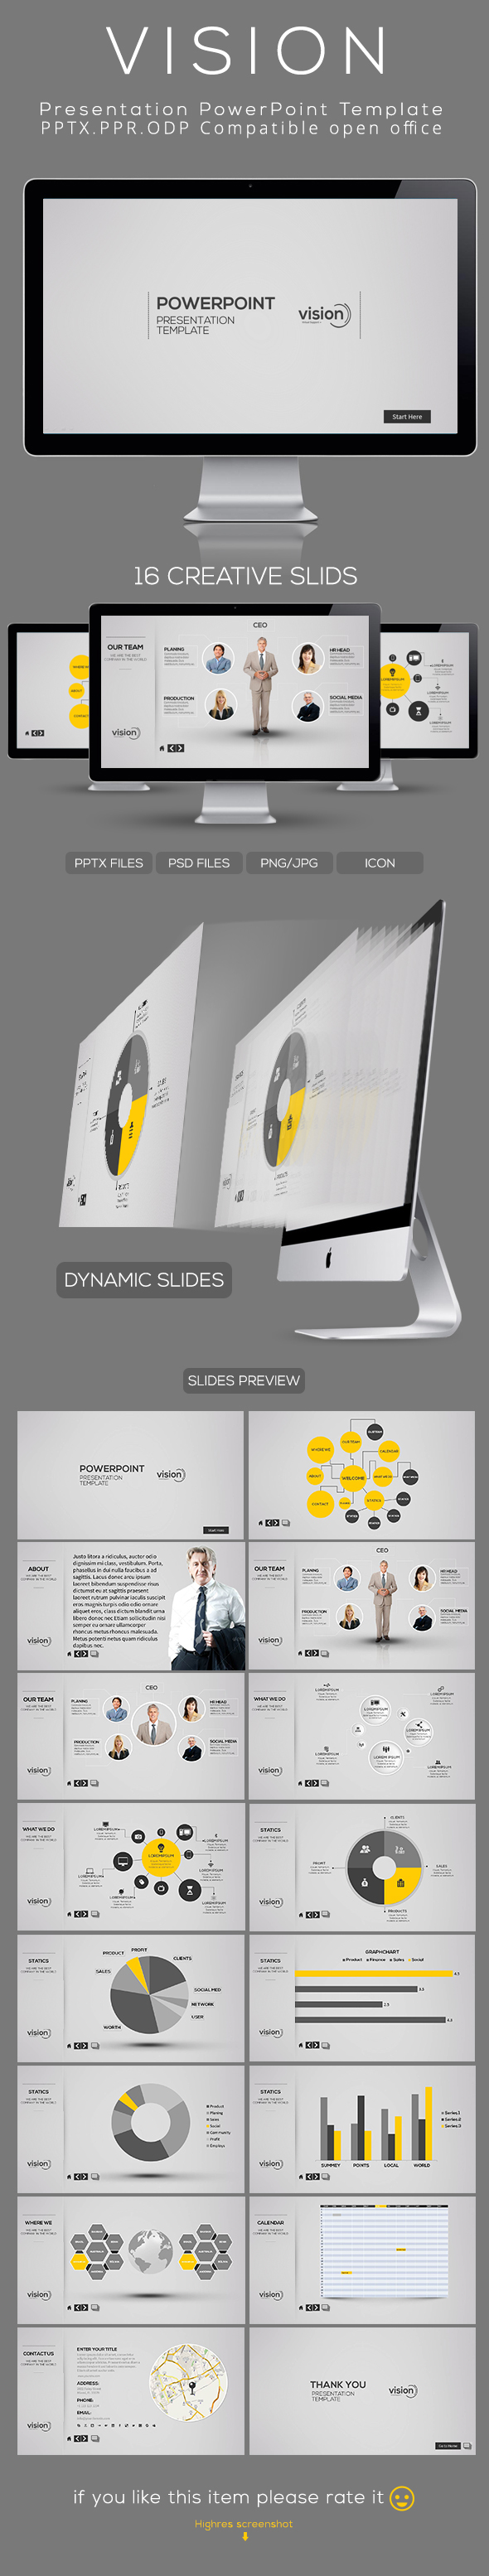 Vision Powerpoint Presentation Template